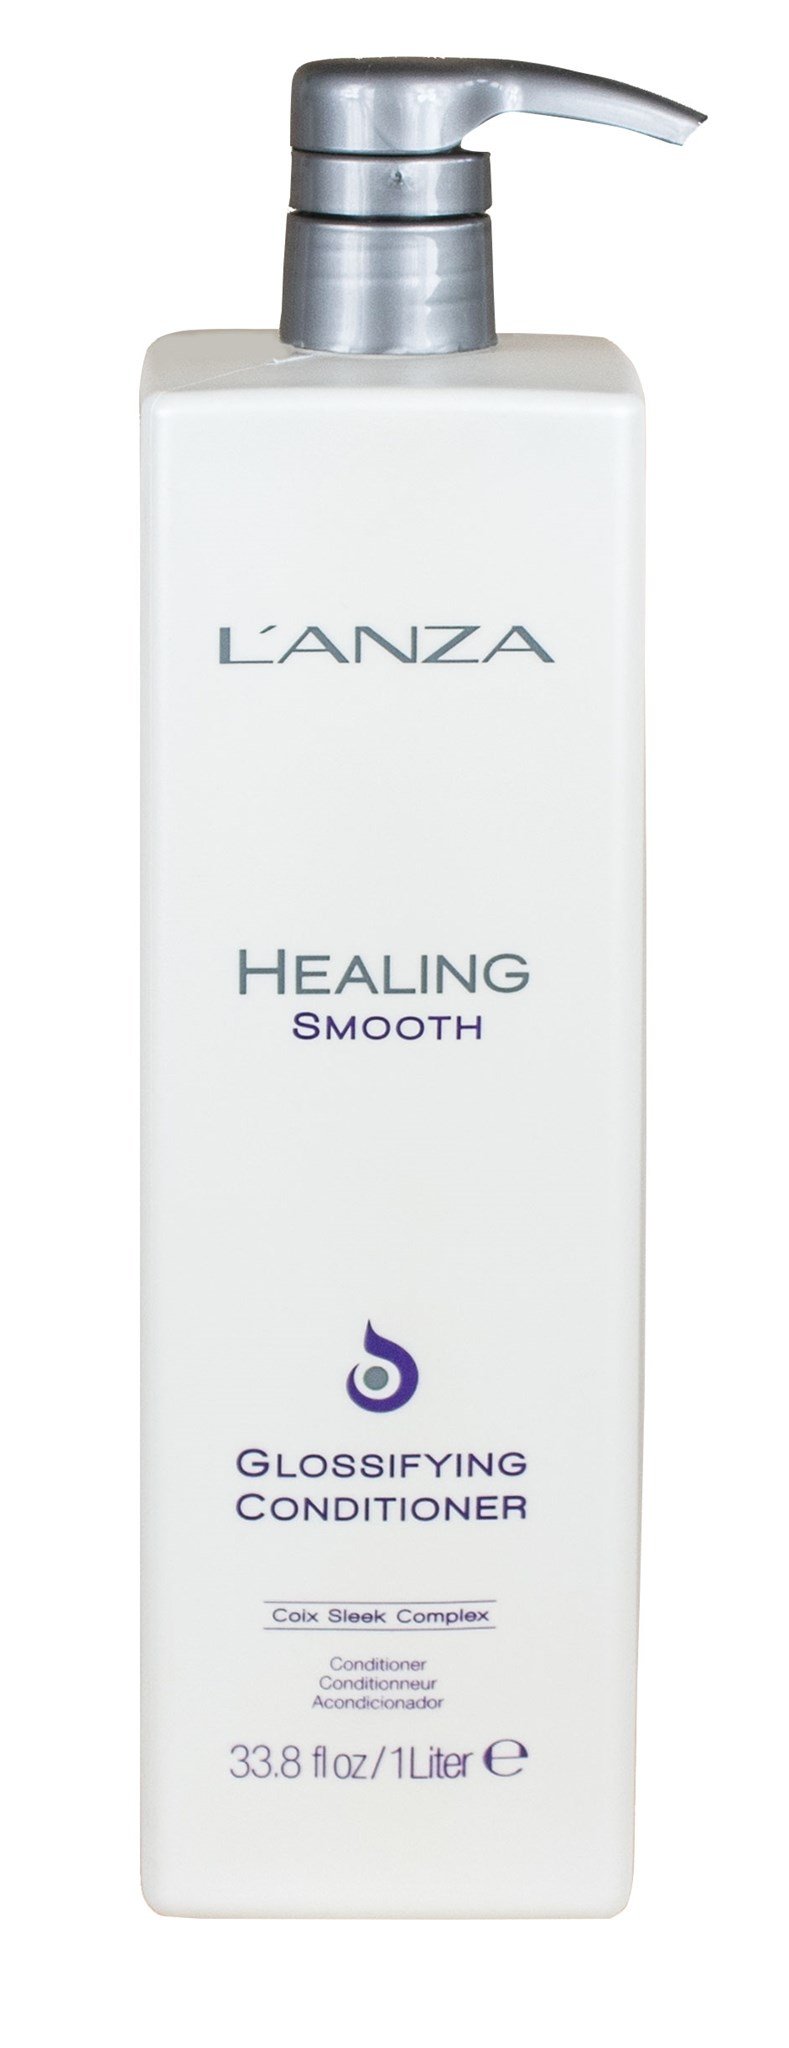 Lanza Healing Smooth Glossifying Conditioner Ltr